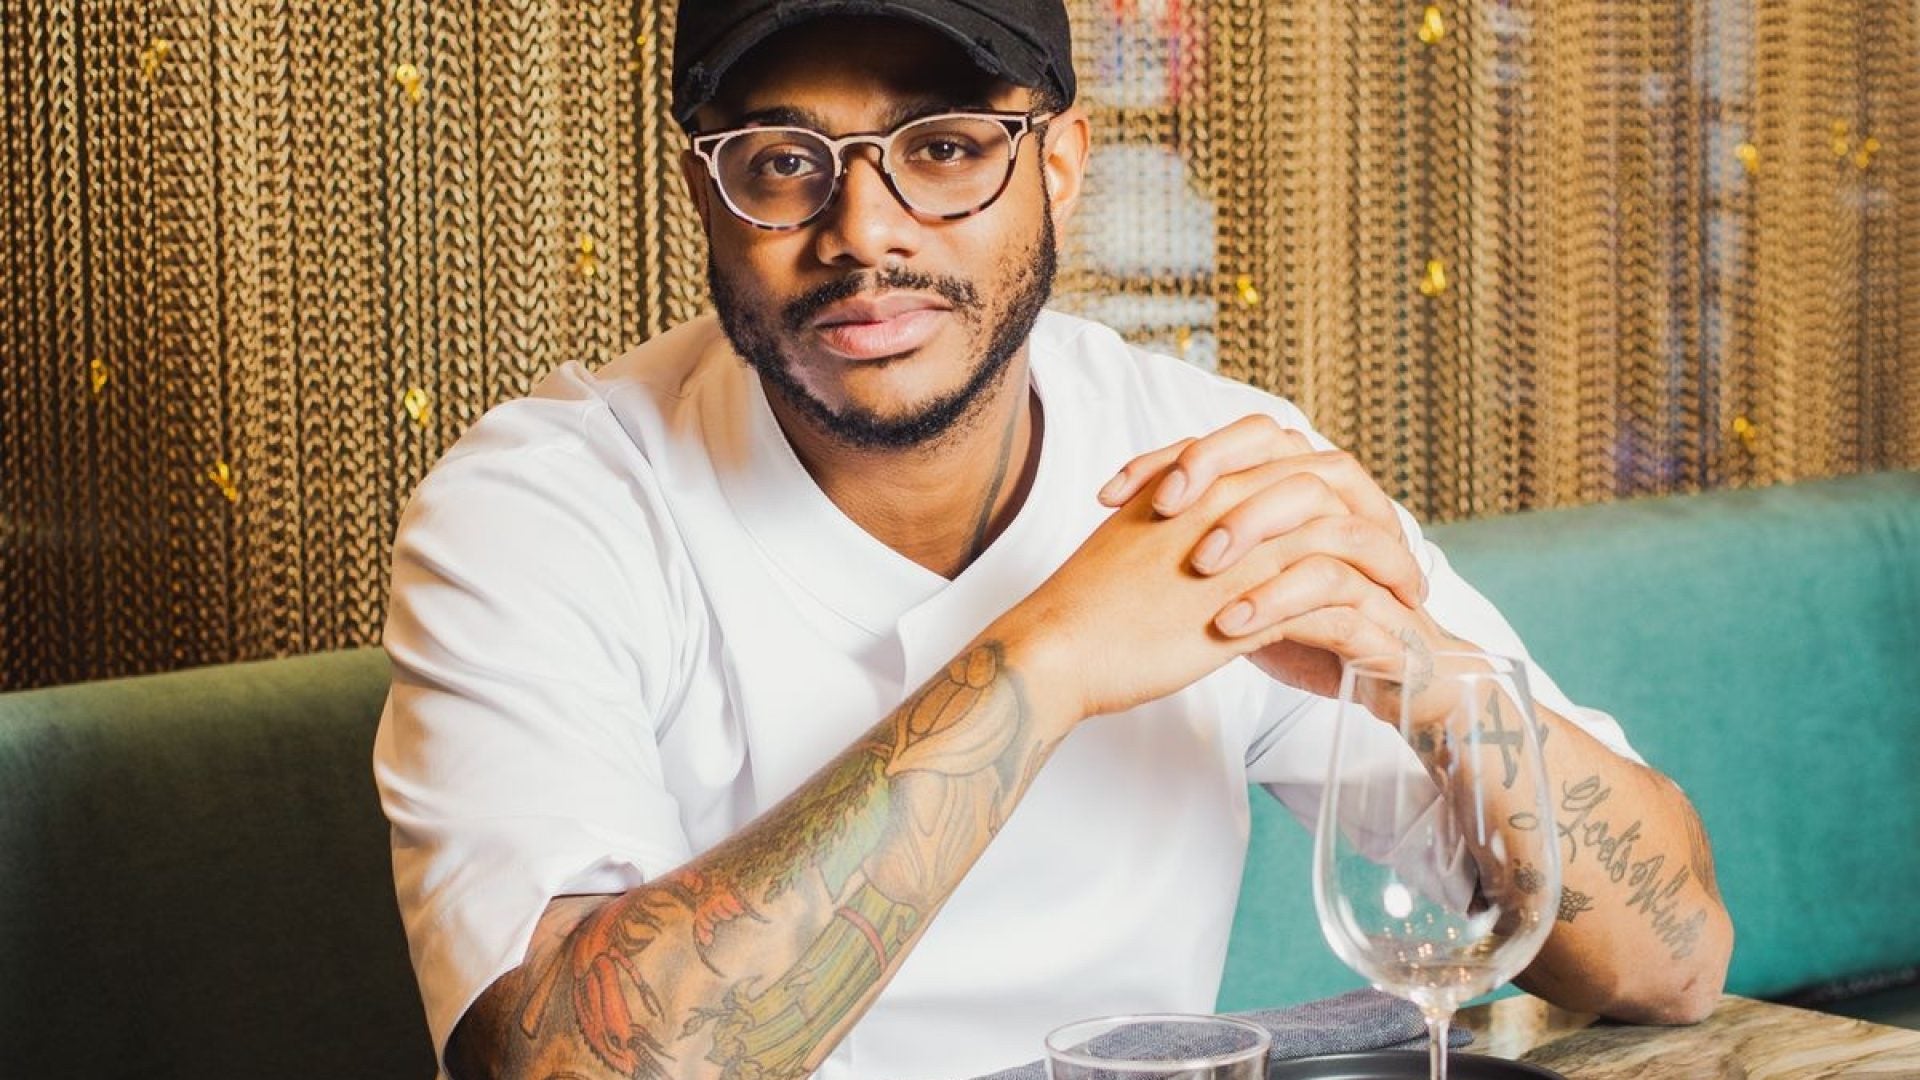 Chef Kwame Onwuachi Merges Food, Culture And Creativity At Miami Art Week